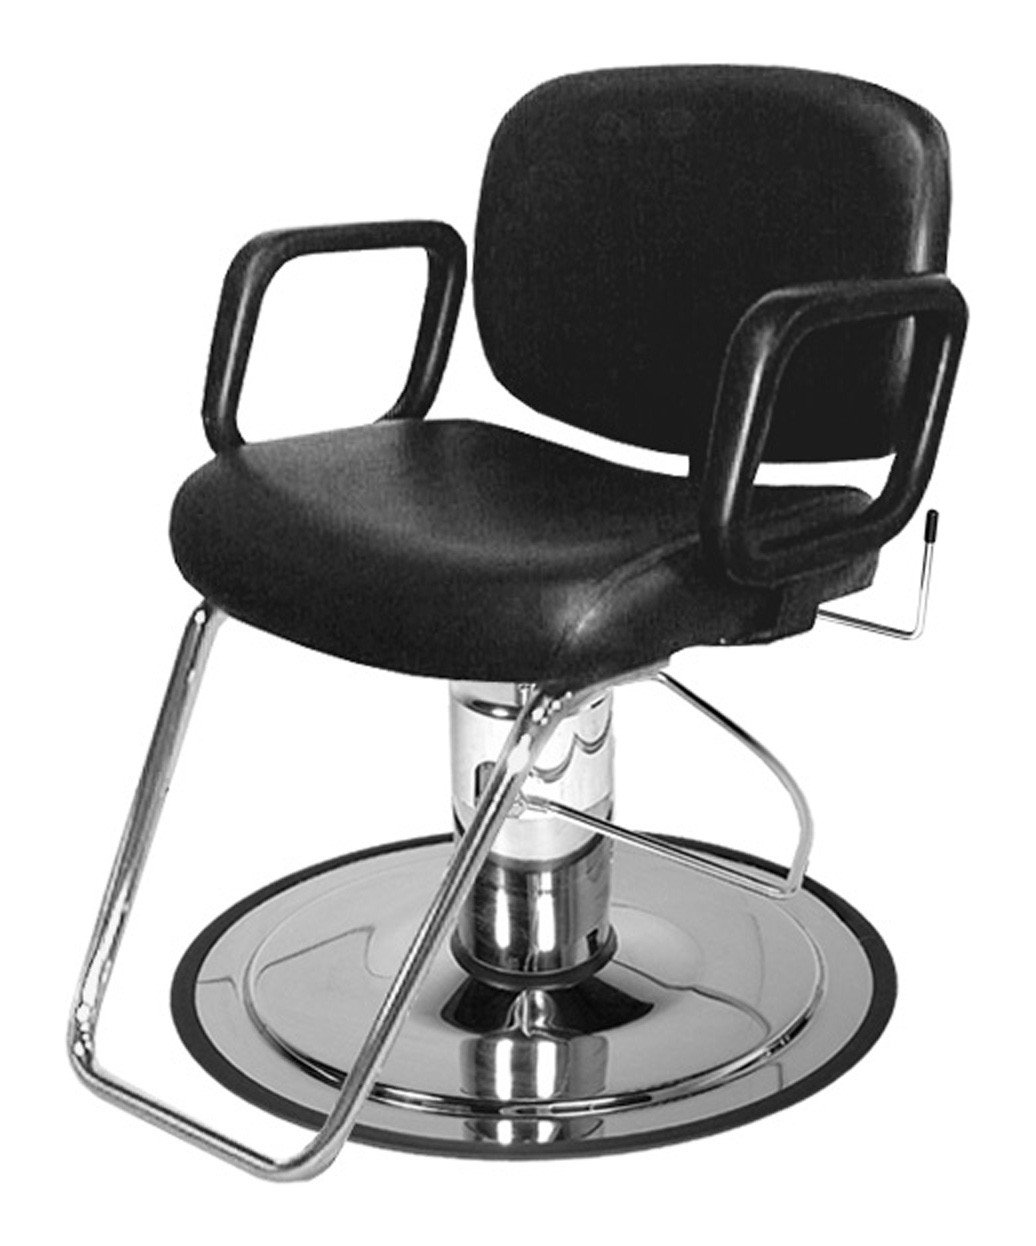 Collins 9410 Maxi All Purpose Chair w/ Telescoping Arms